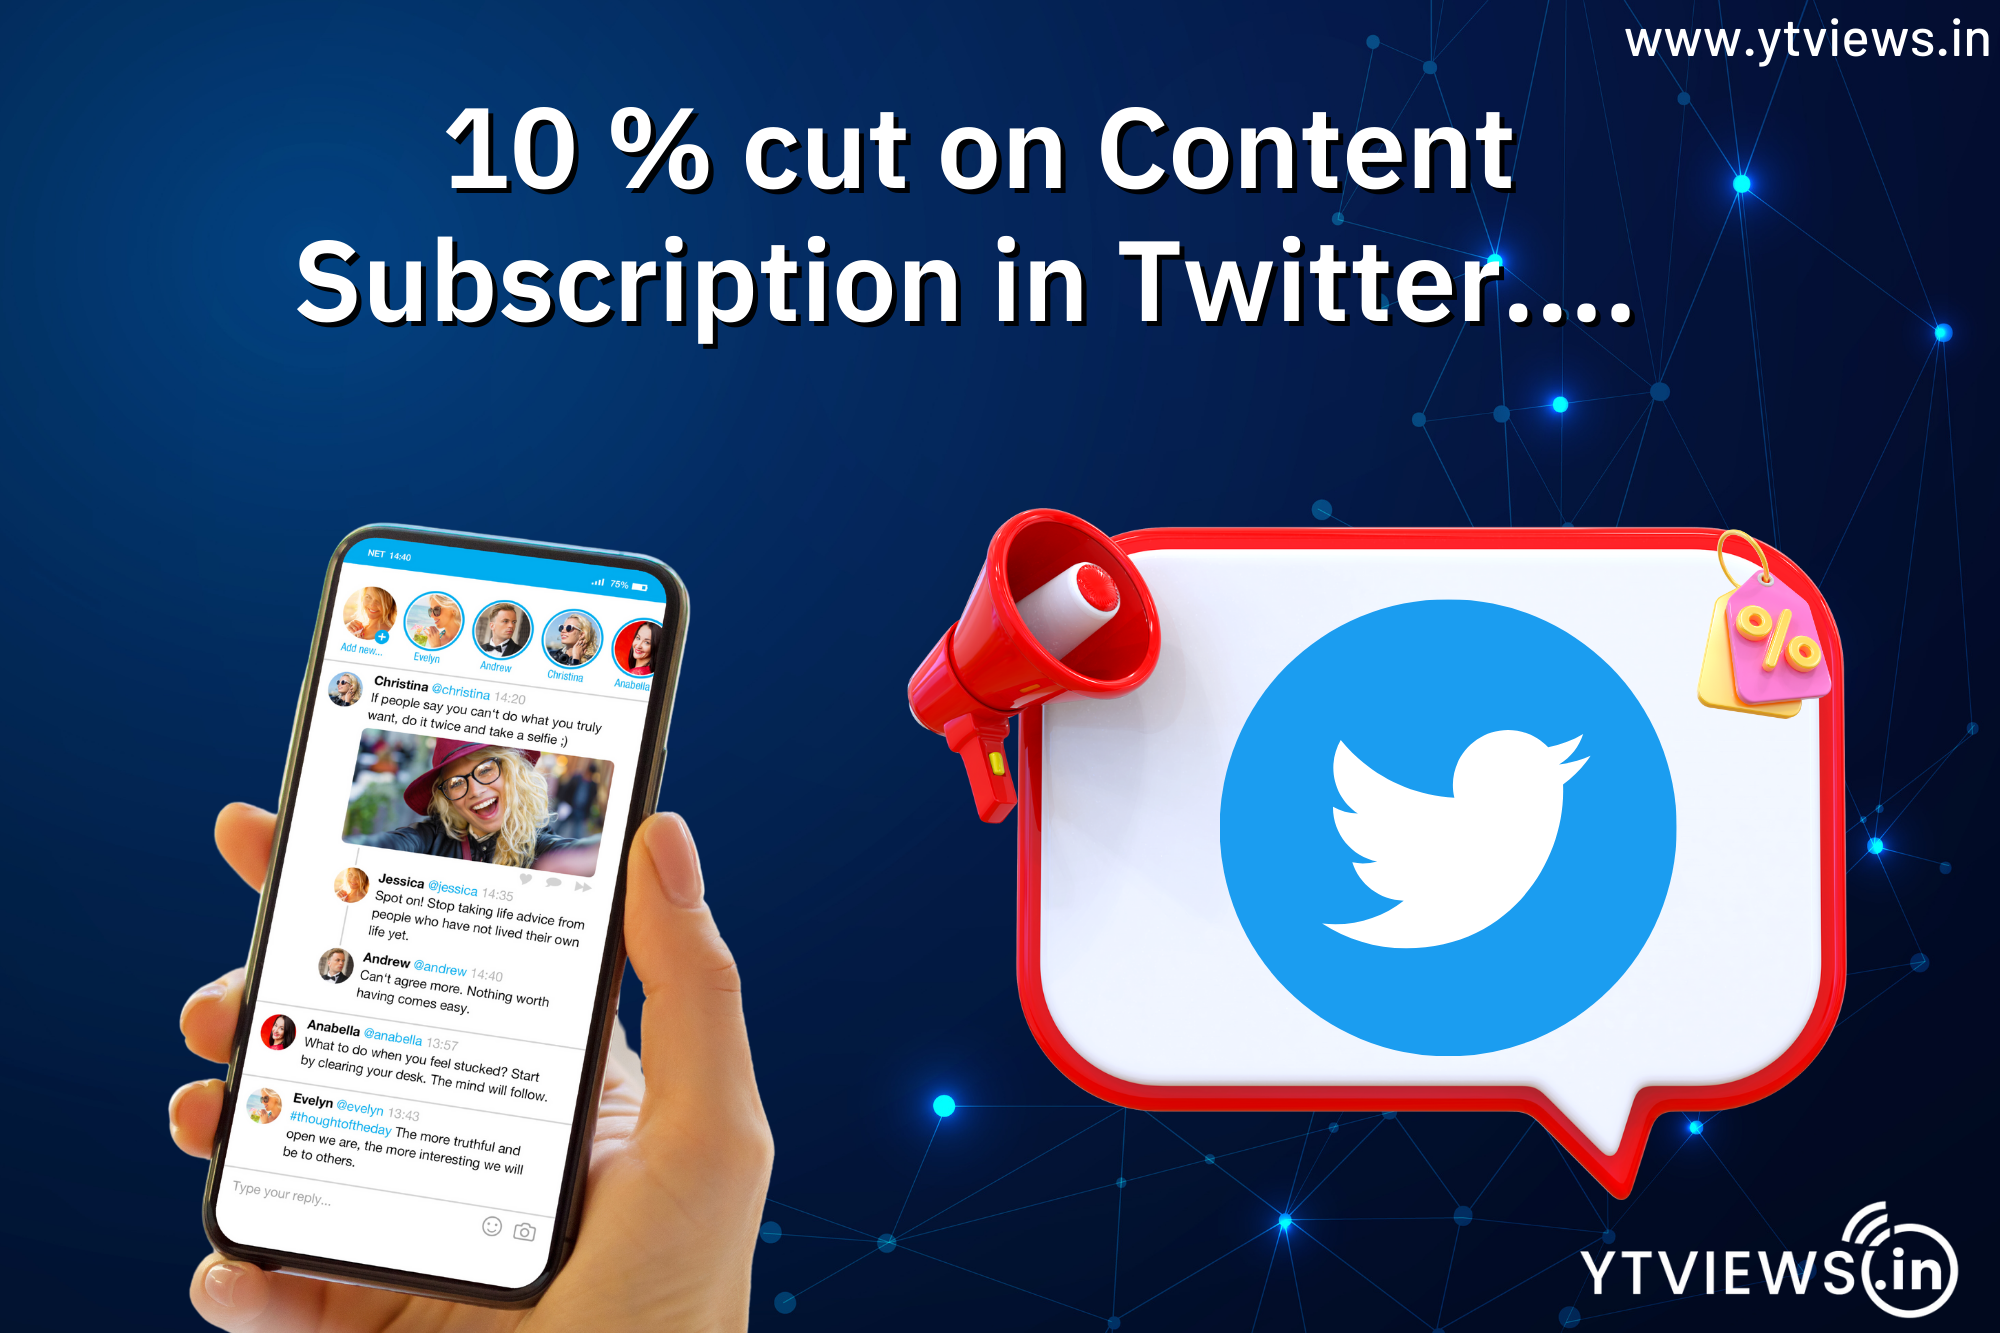 Twitter/X announces a 10% cut on content subscription post 12 months of applying